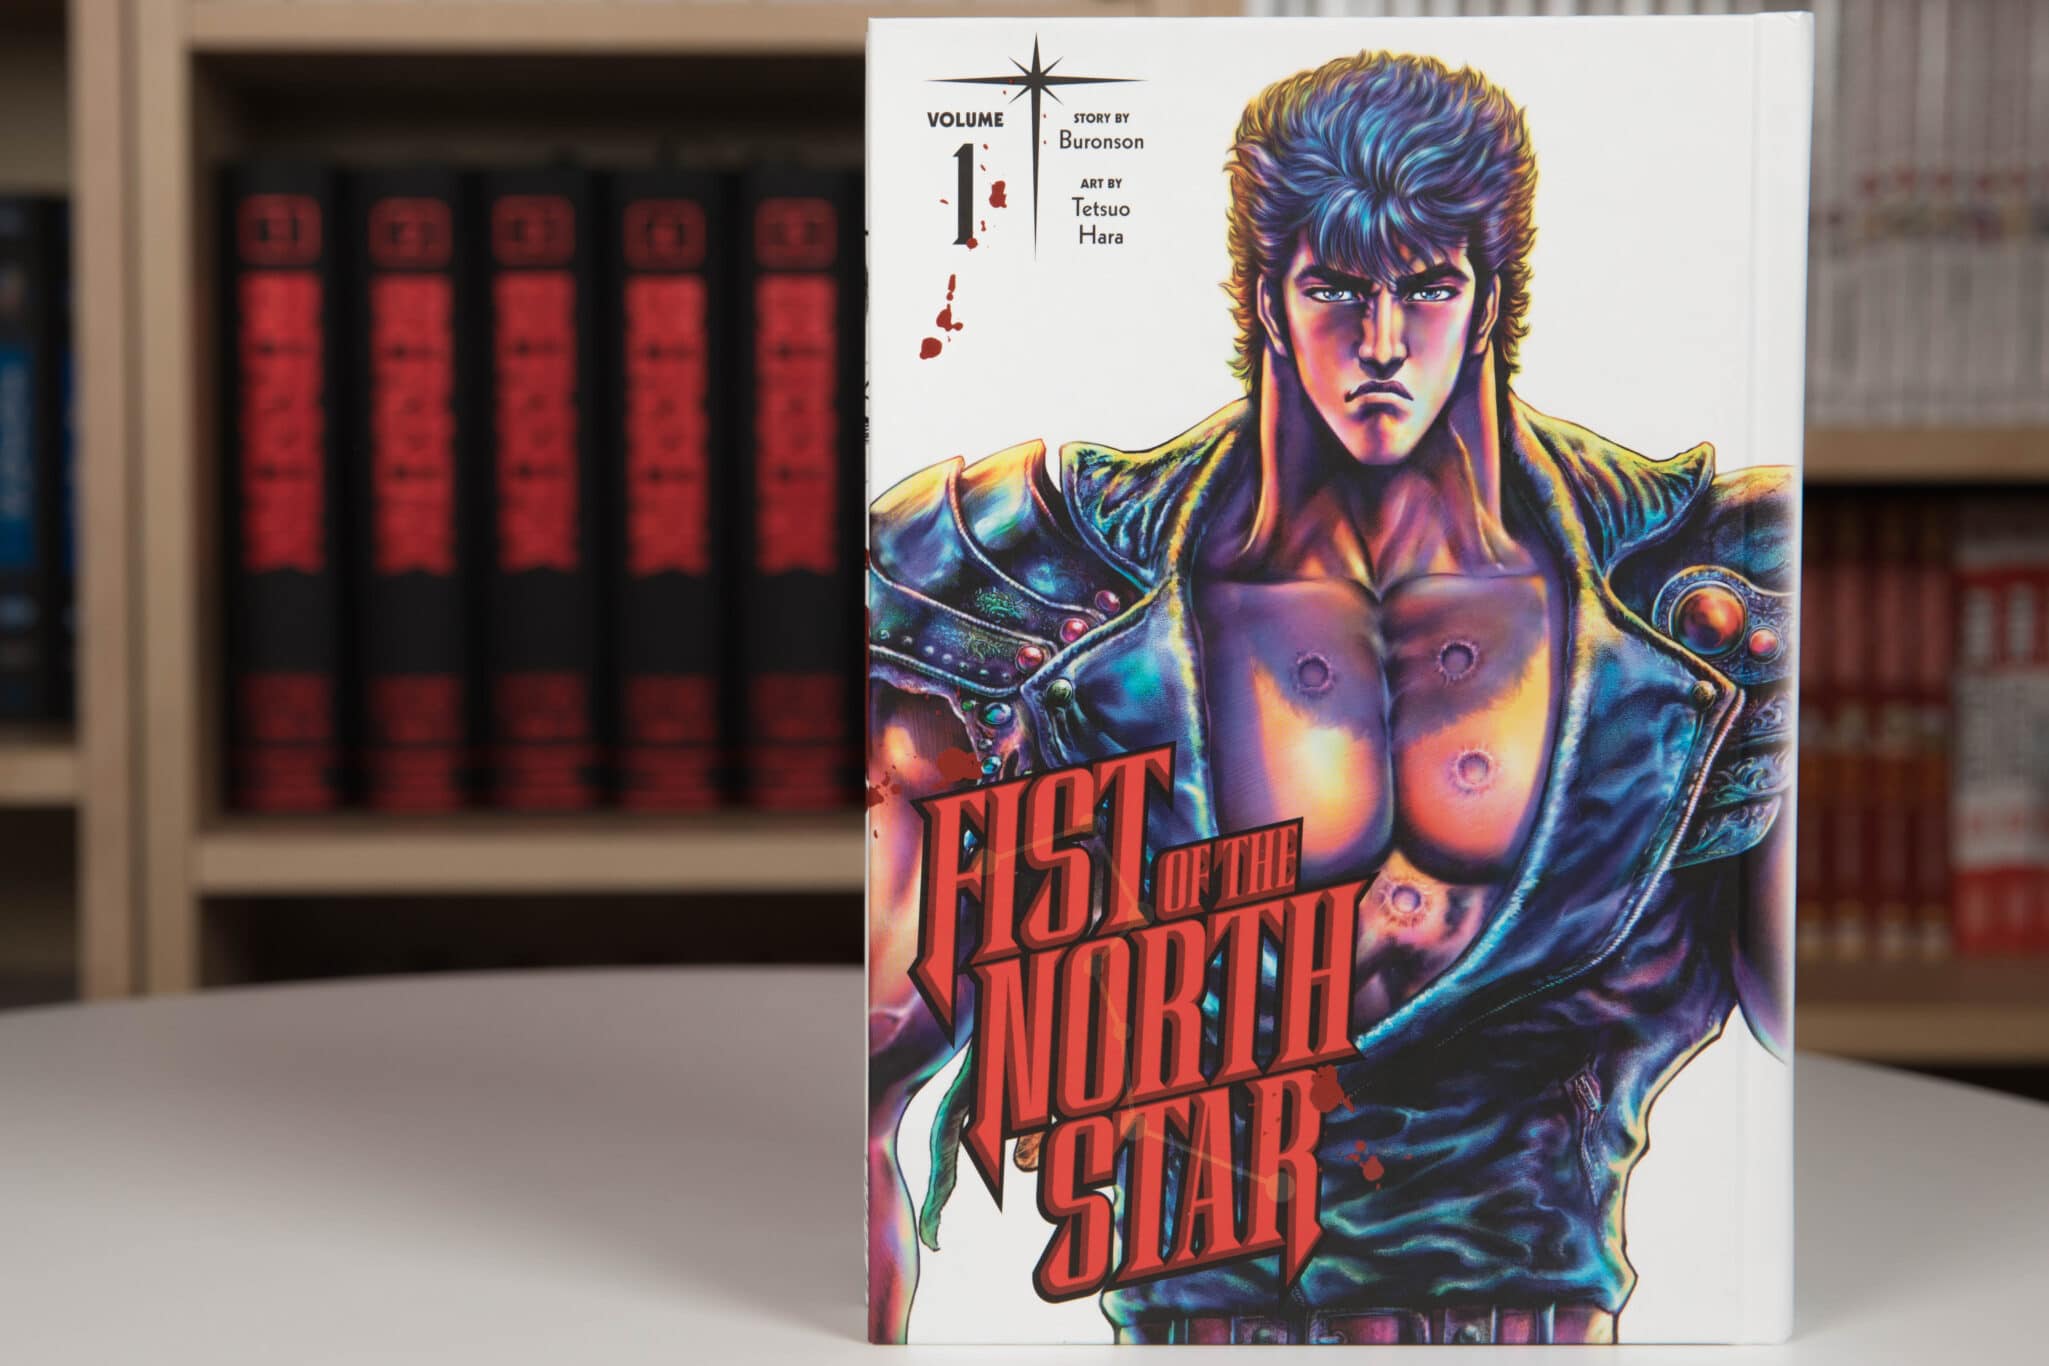 Fist of the North Star, Vol. 1 Manga Review